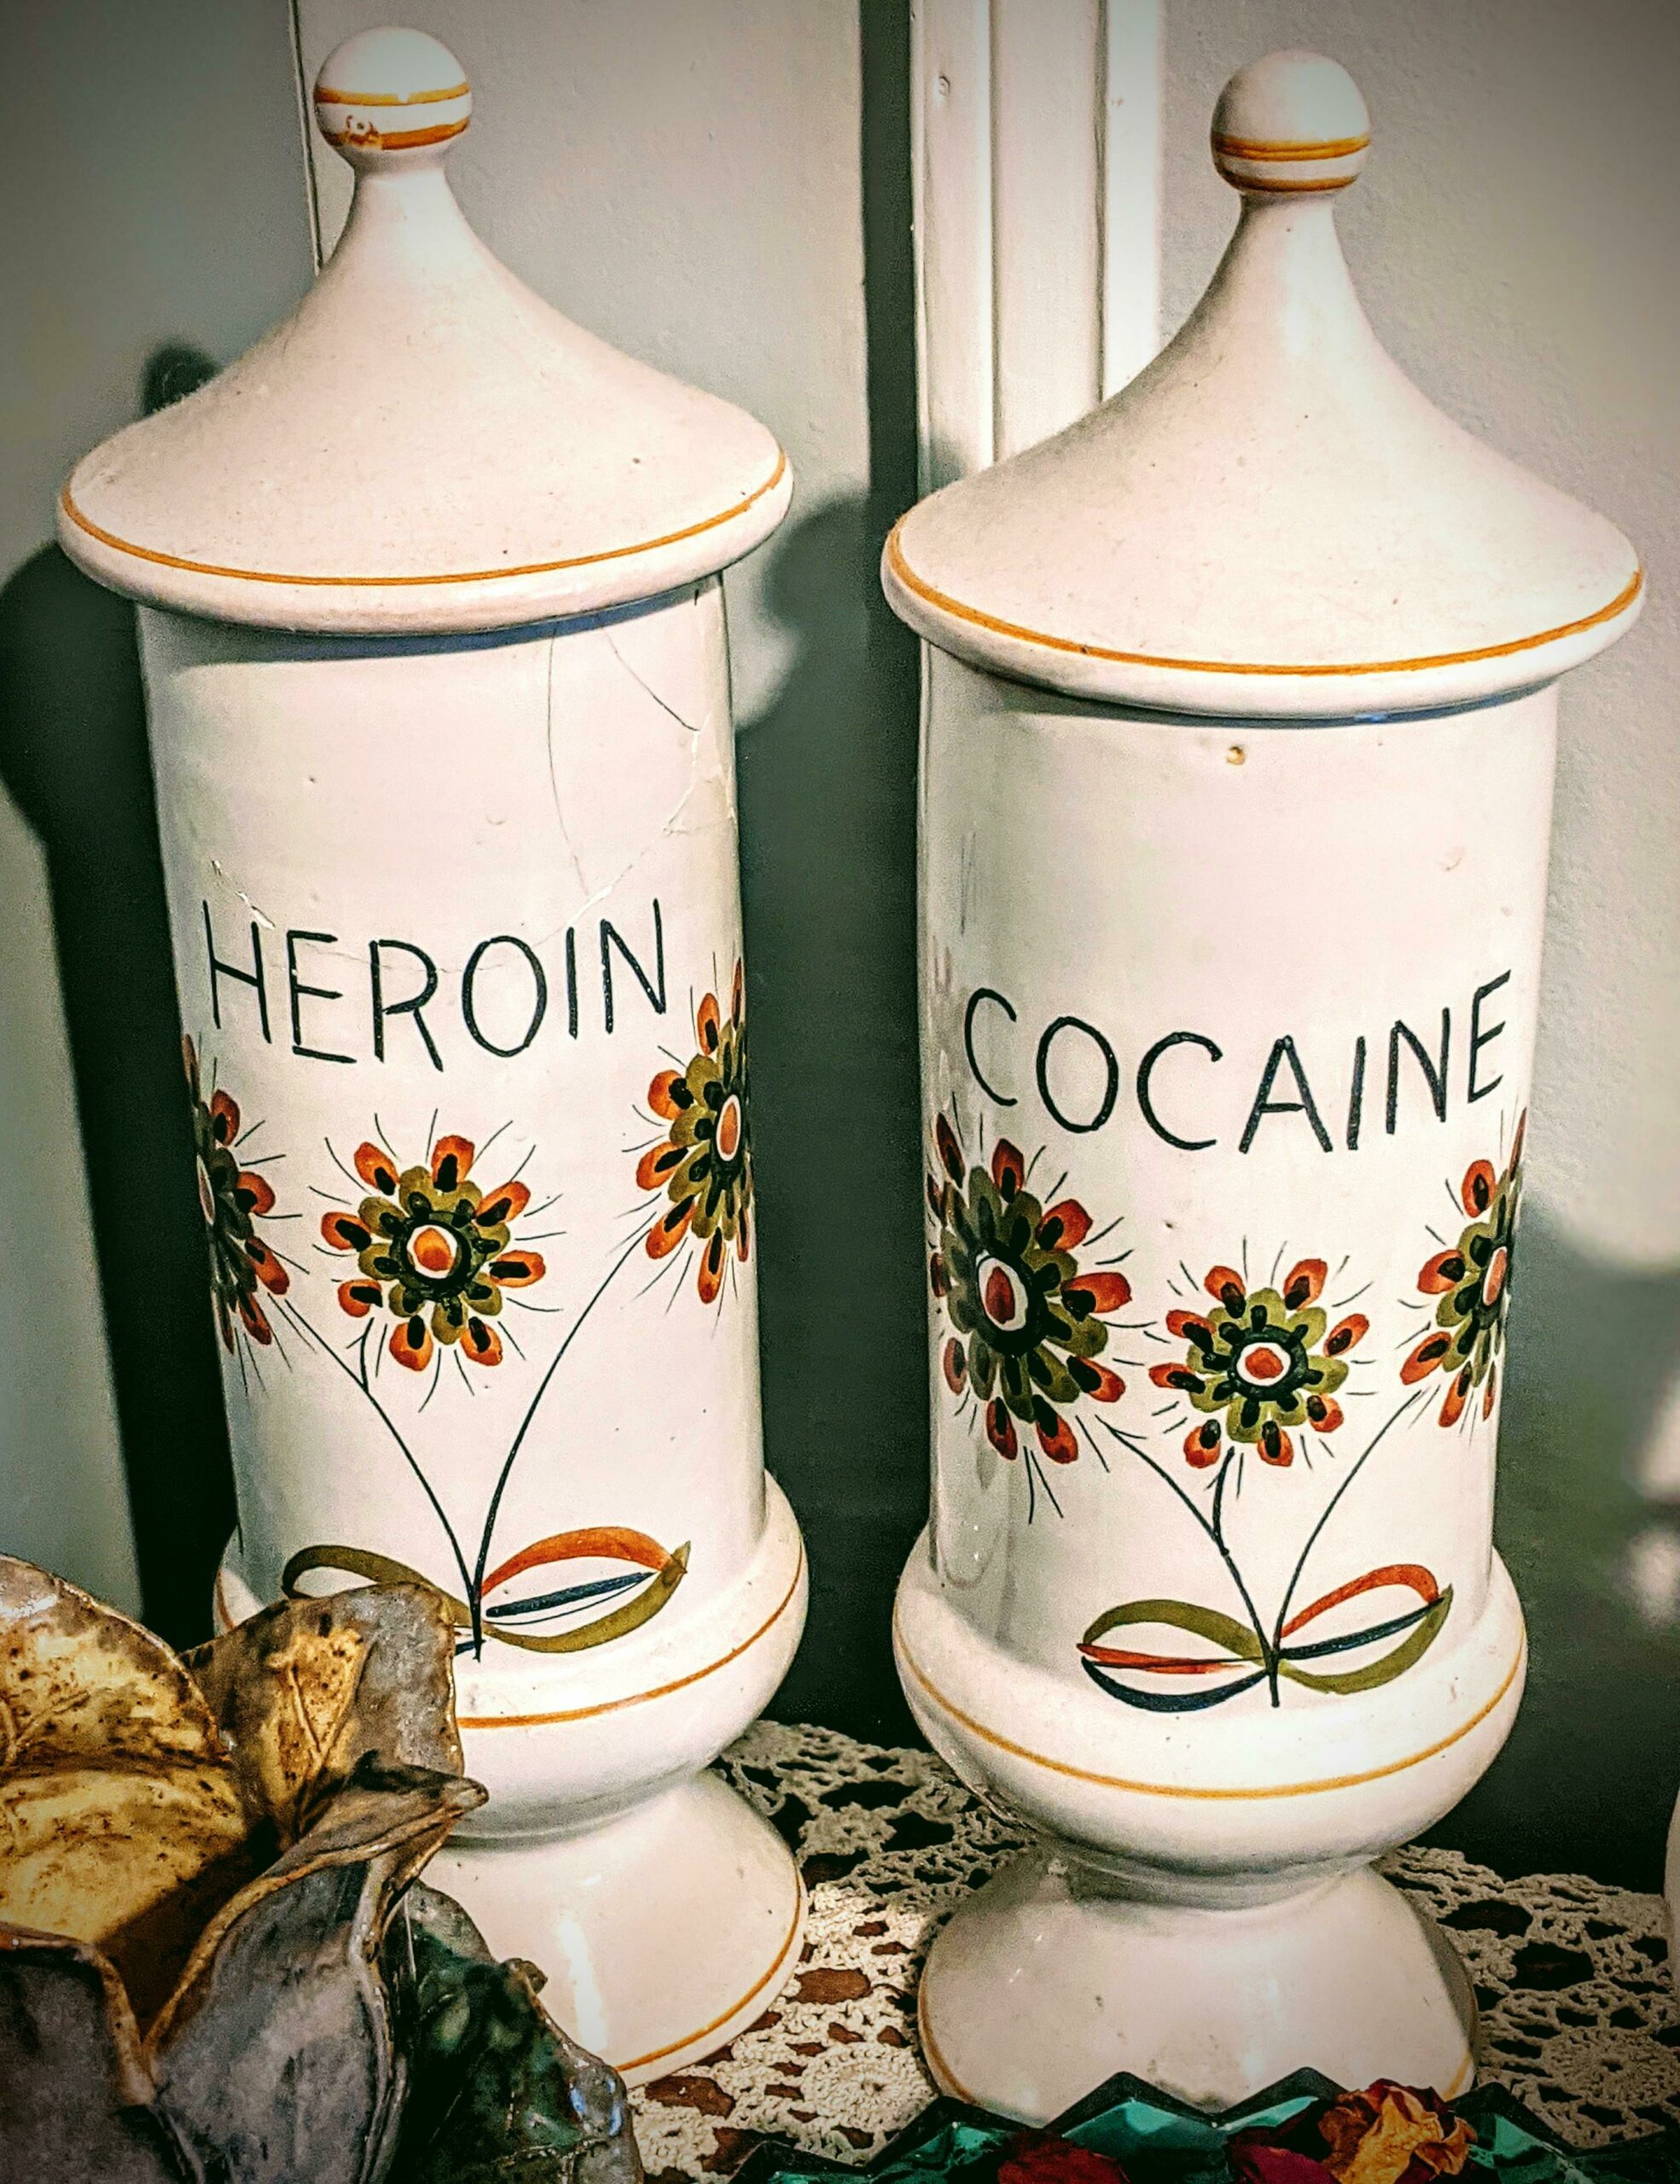 My Grandmother's Decorative "Spice Jars" From The 50's